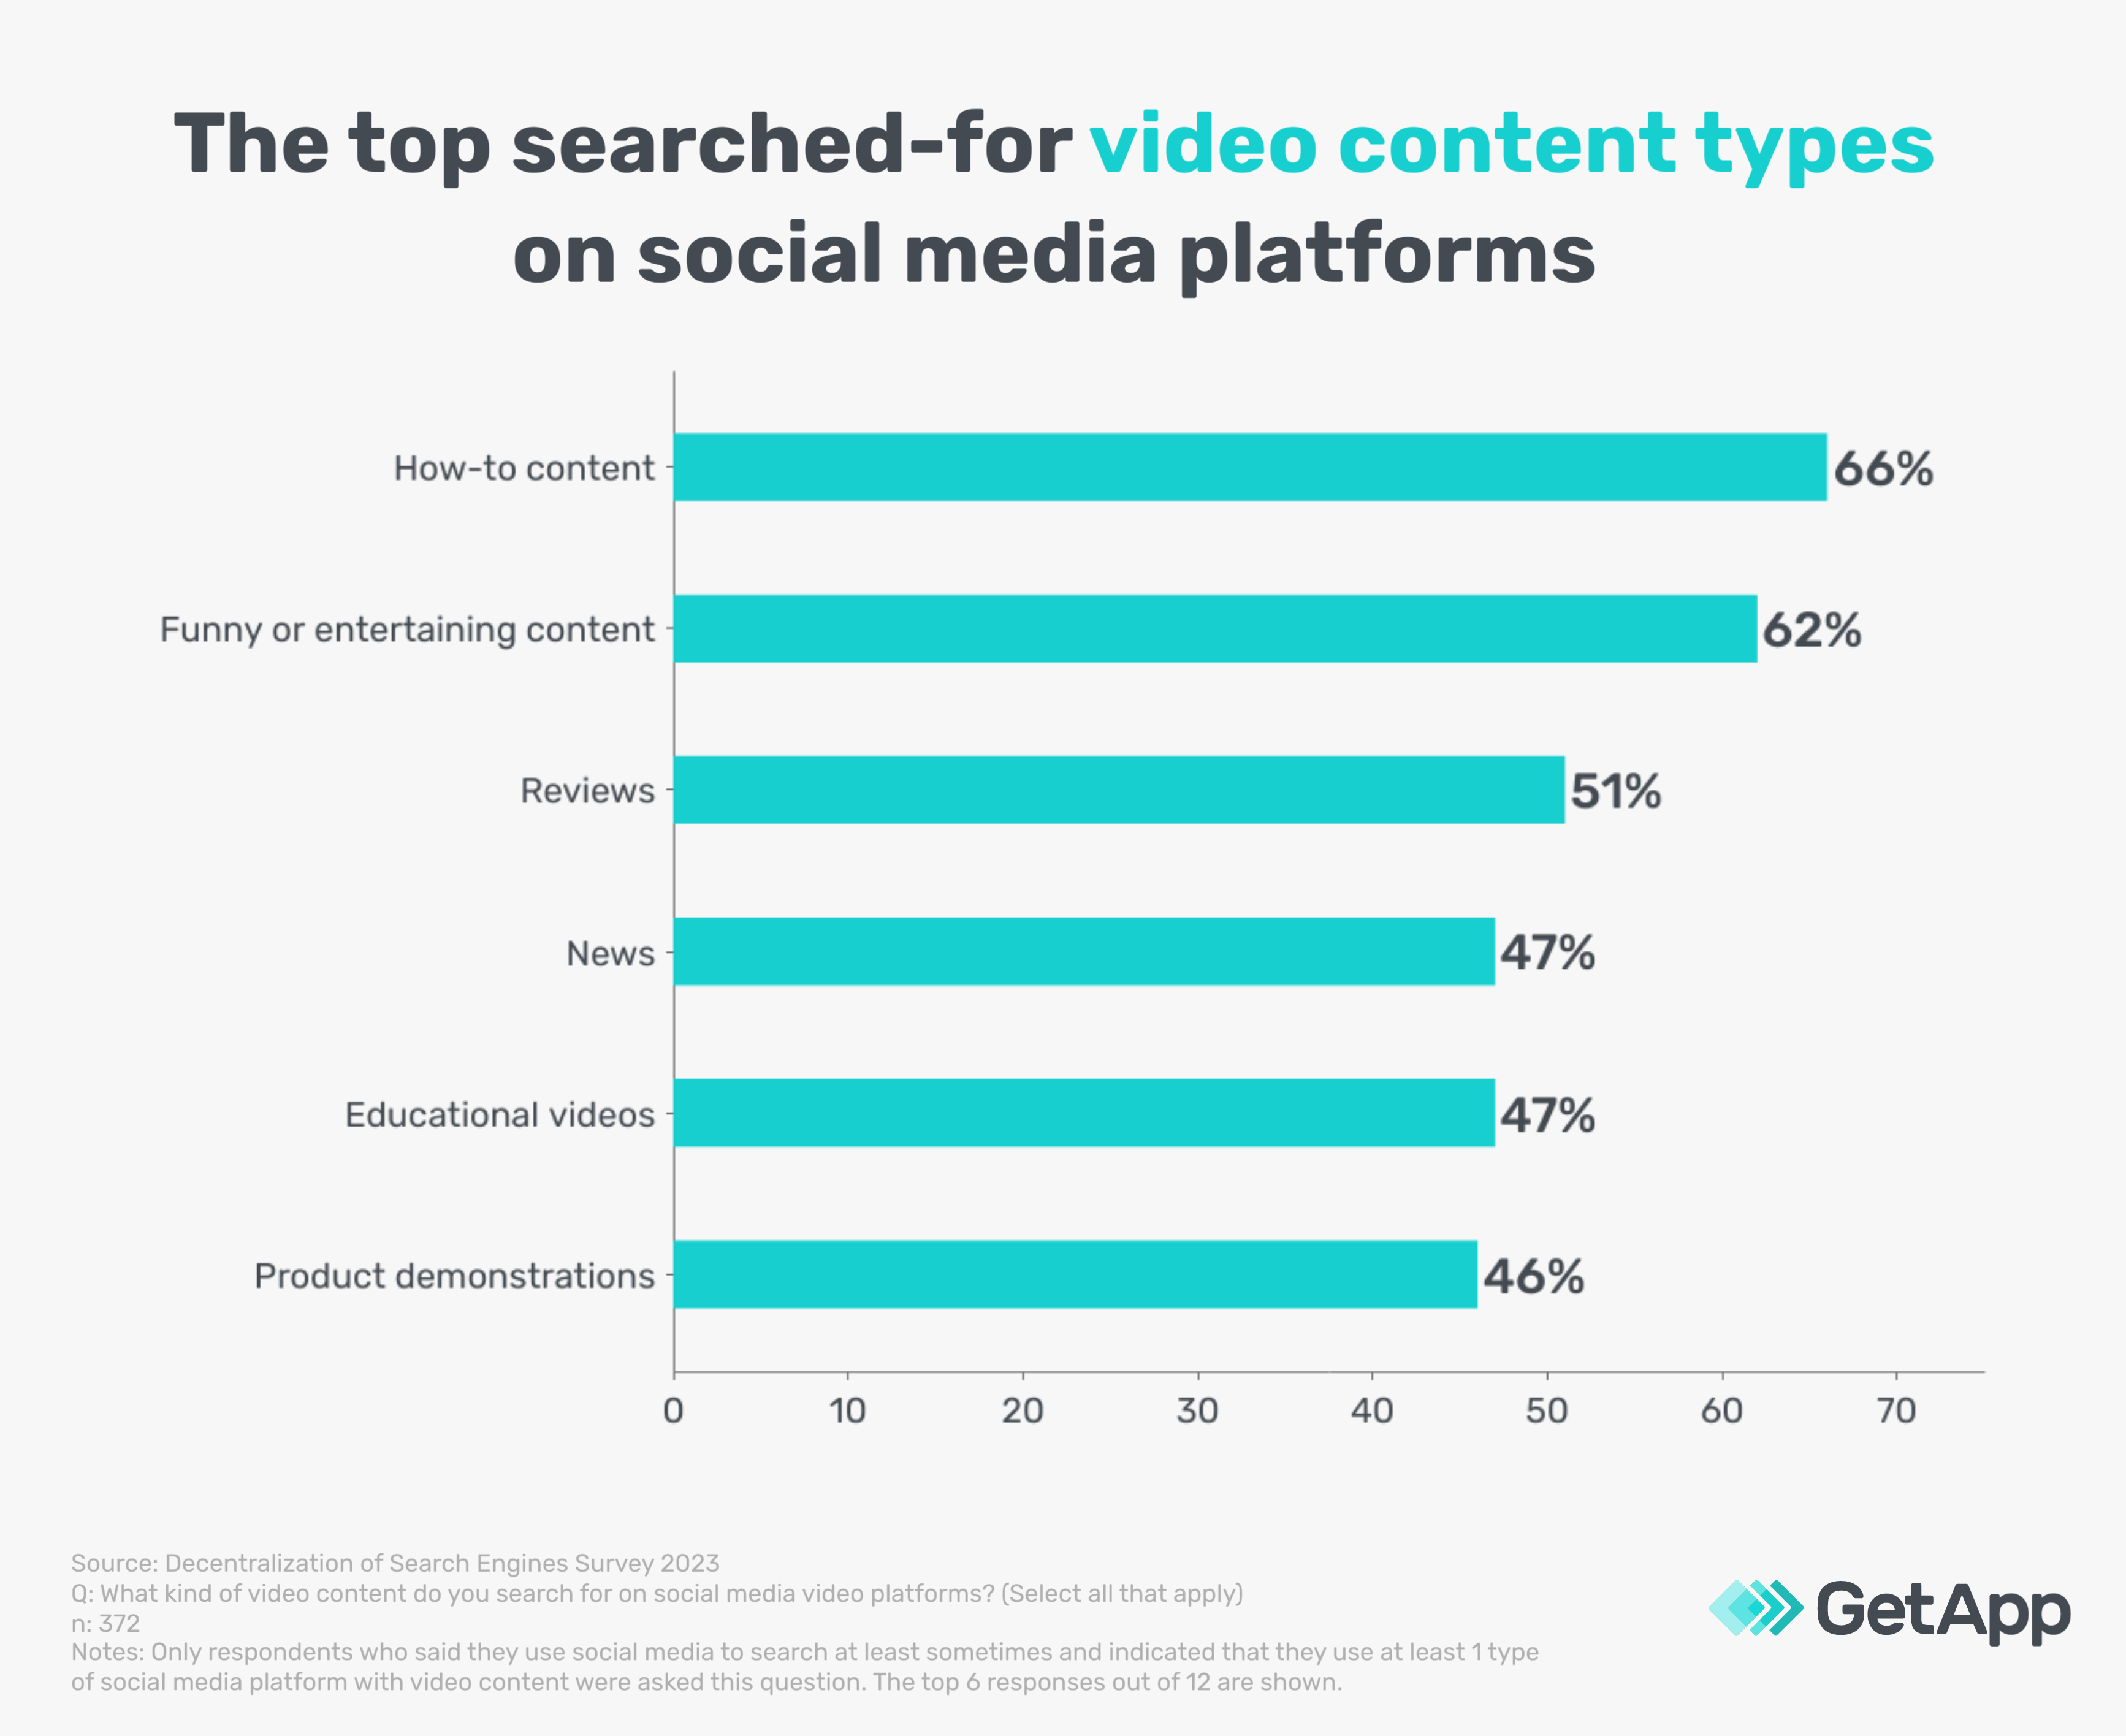  top searched-for social media video platform content types